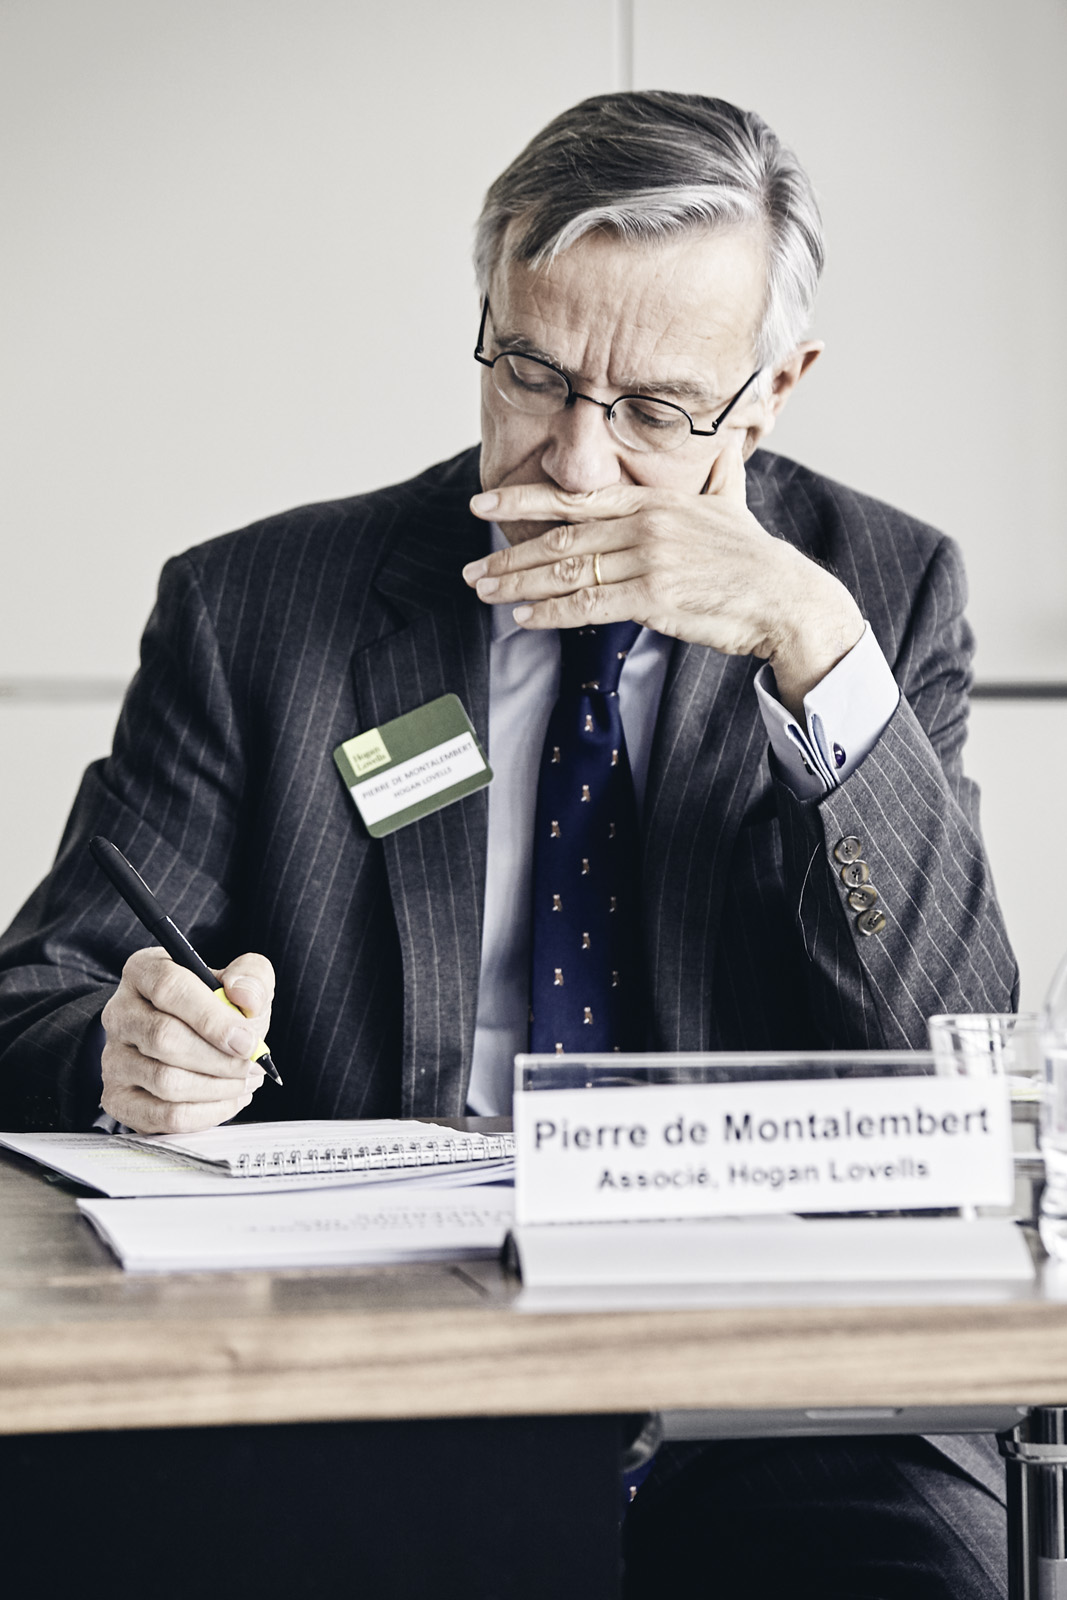 Concurrences Journal Paris : lawyers talks and seminars in Paris. Giovanni Ambrosio Corporate photography